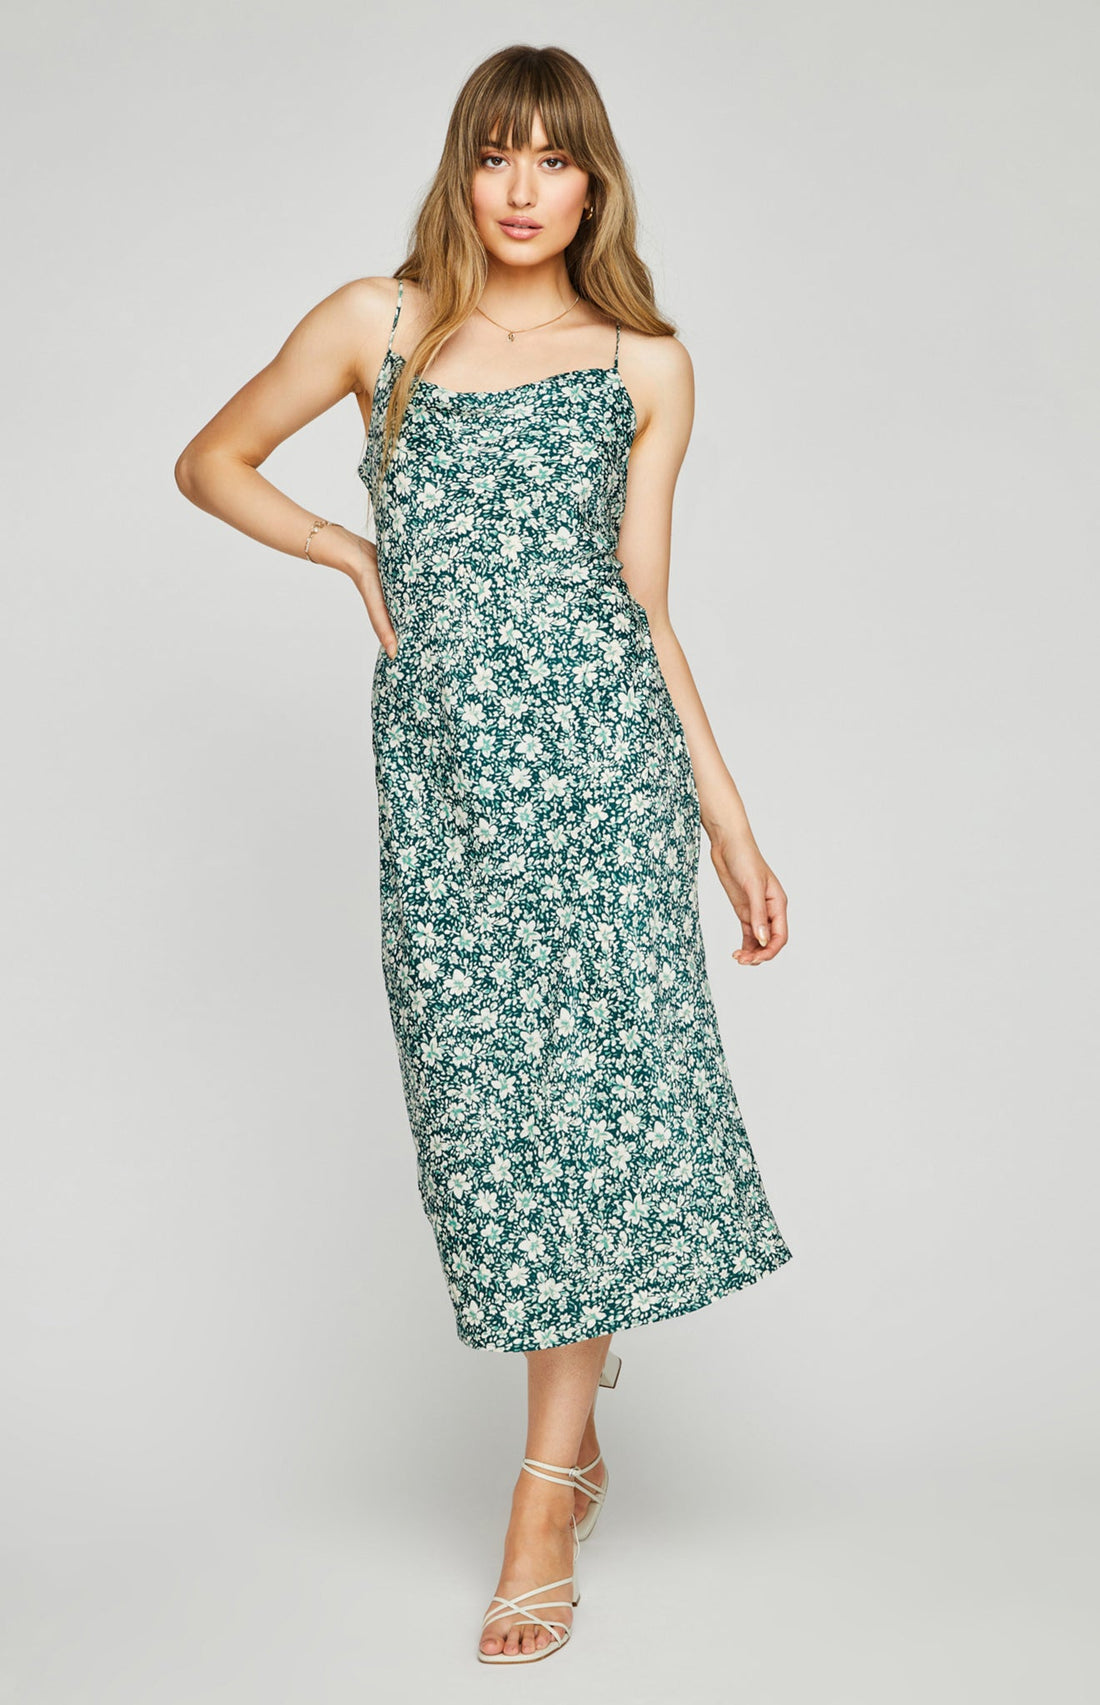 GENTLE FAWN SERENITY DRESS - PALM DITSY  GENTLE FAWN   